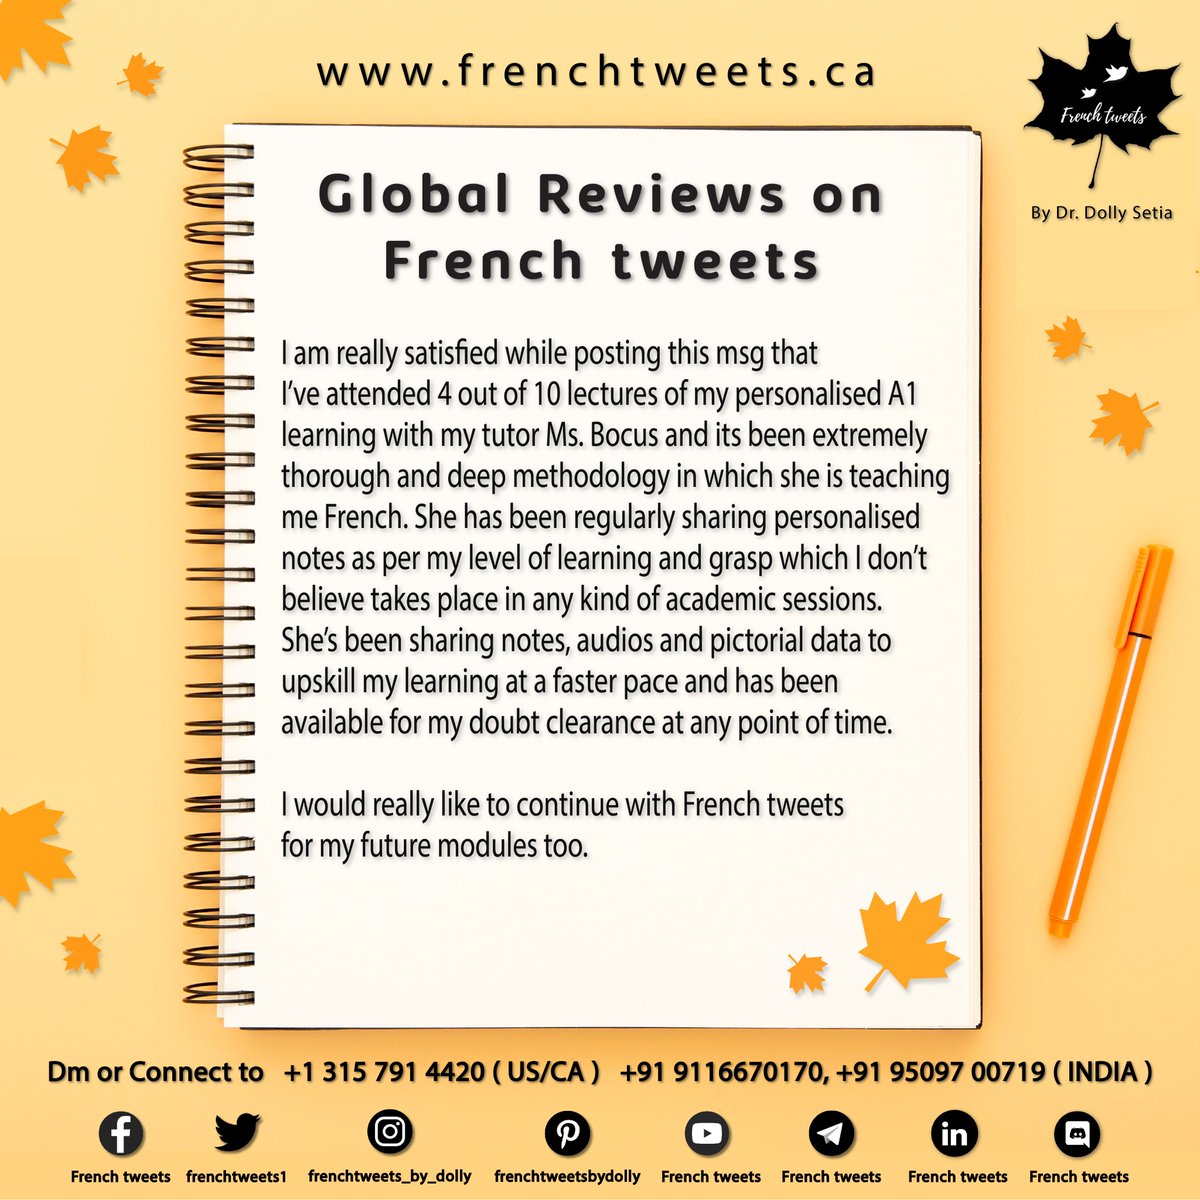 ◀️We are very grateful to our learners for dedicating such kind words. Receiving reviews like this makes the hard work that goes behind everything worthwhile. 

✅Register through our Website frenchtweets.ca/learners-regis…

#review #feedback #Learnersreview